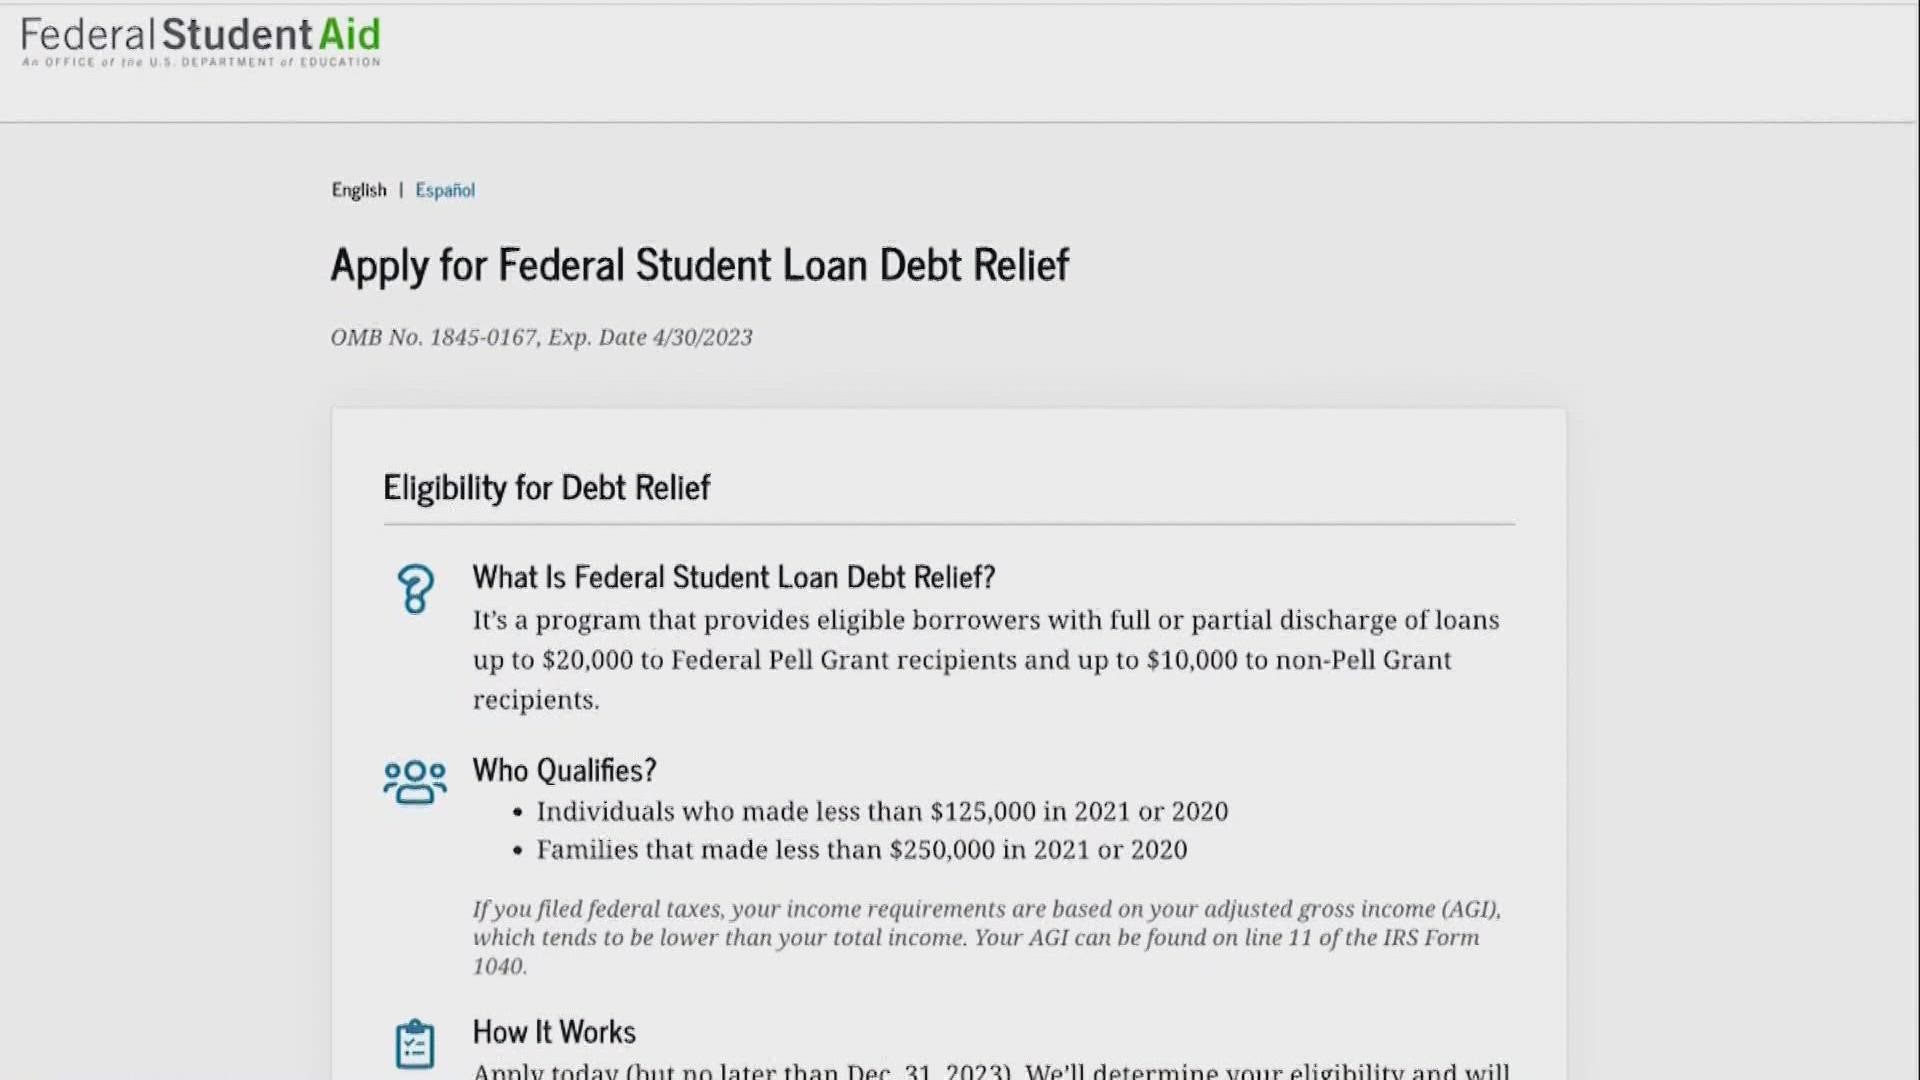 The Supreme Court rejected a request to block the Biden administration's student loan debt relief program.